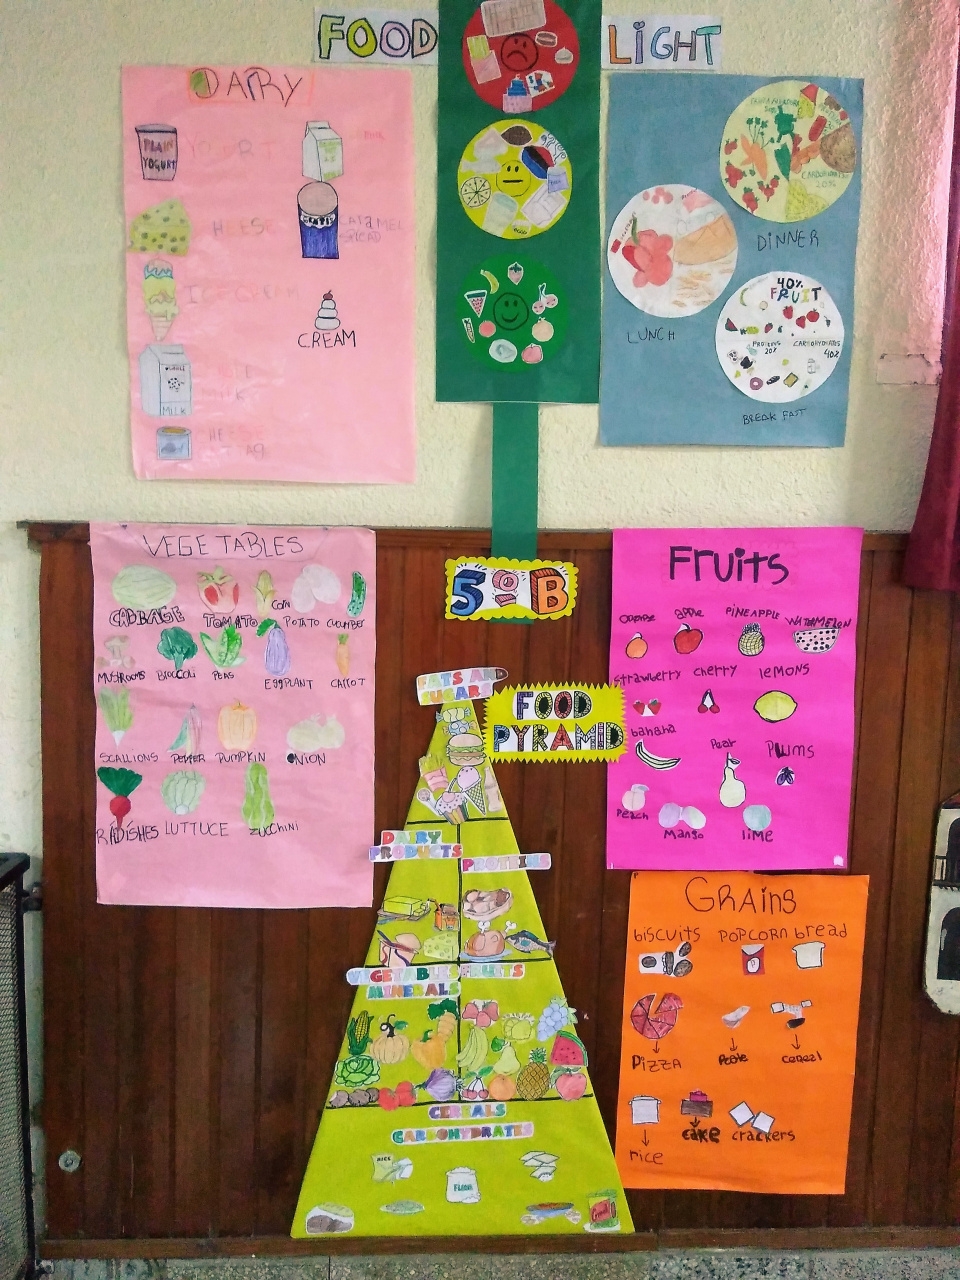 How to eat healthy. Project made by 5th grade students